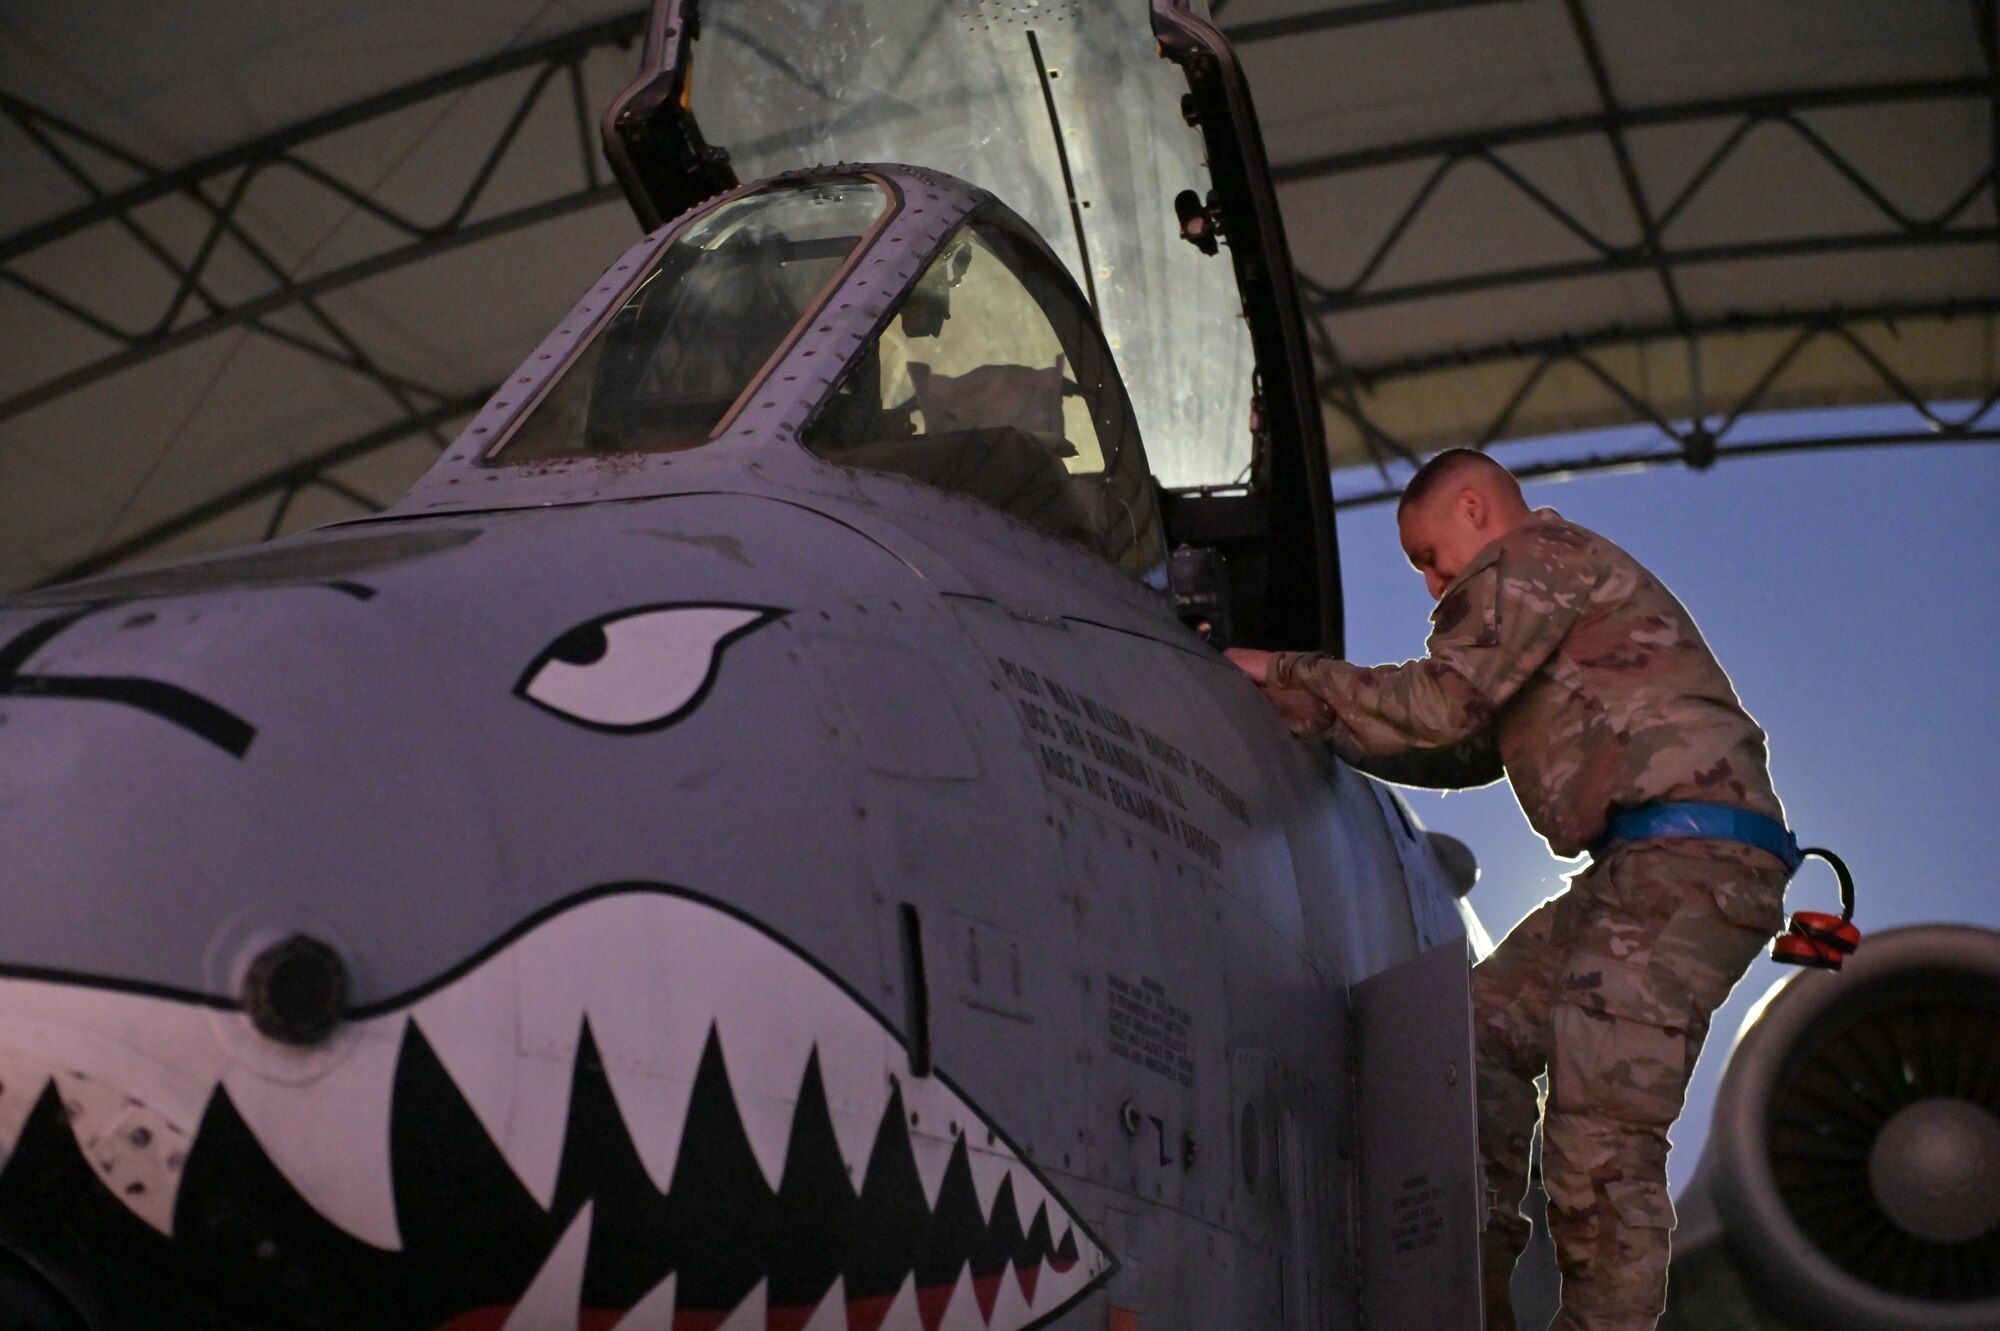 U.S. Air Force Senior Airman Favian Trujillo,74th Fighter Generation Squadron crew chief, climbs the steps to the cockpit of an A-10C Thunderbolt II at Moody Air Force Base, Georgia, Oct. 16, 2022. The 23rd Wing deployed A-10C Thunderbolt II aircraft and support personnel to Andersen Air Force Base, Guam for a routine Dynamic Force Employment Operation. (U.S. Air Force photo by Senior Airman Rebeckah Medeiros)